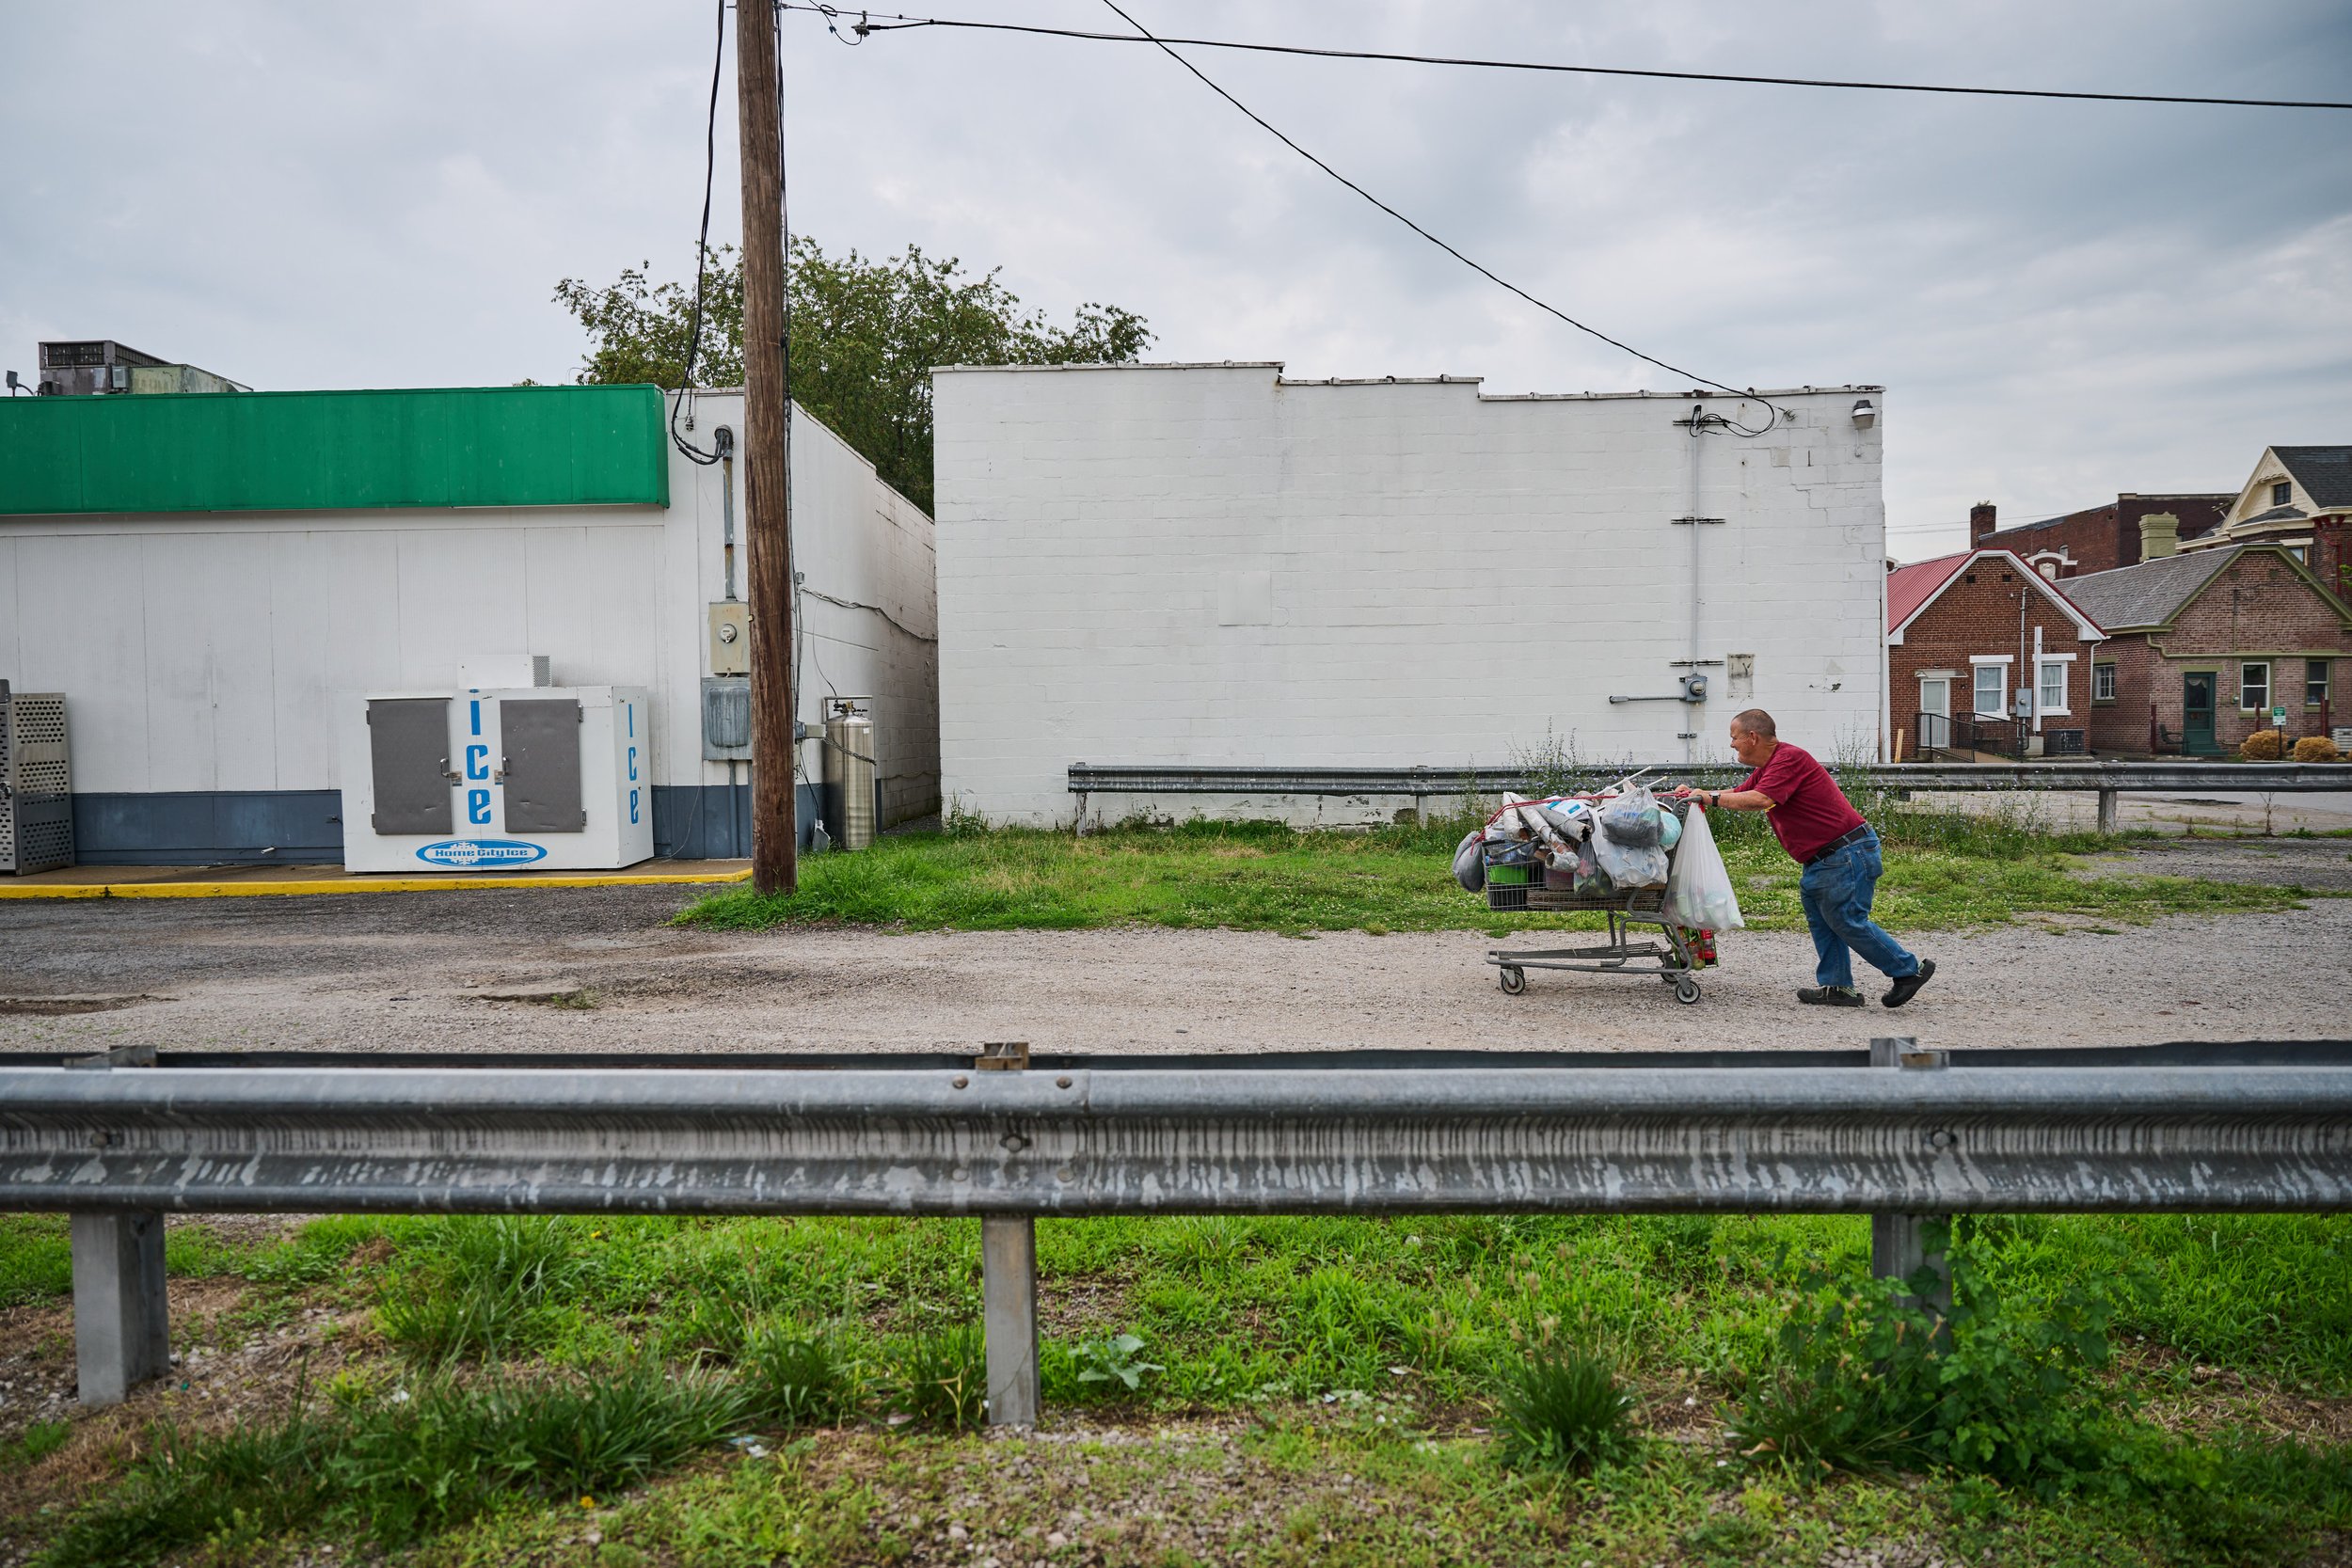  7/8/23—Cynthiana, Kentucky — Fryman walks with his shopping cart back to the gas station as storms begin to hit Cynthiana. When the weather turns bad, he often hangs out inside the store, where he jokes with customers and catches his breath until th